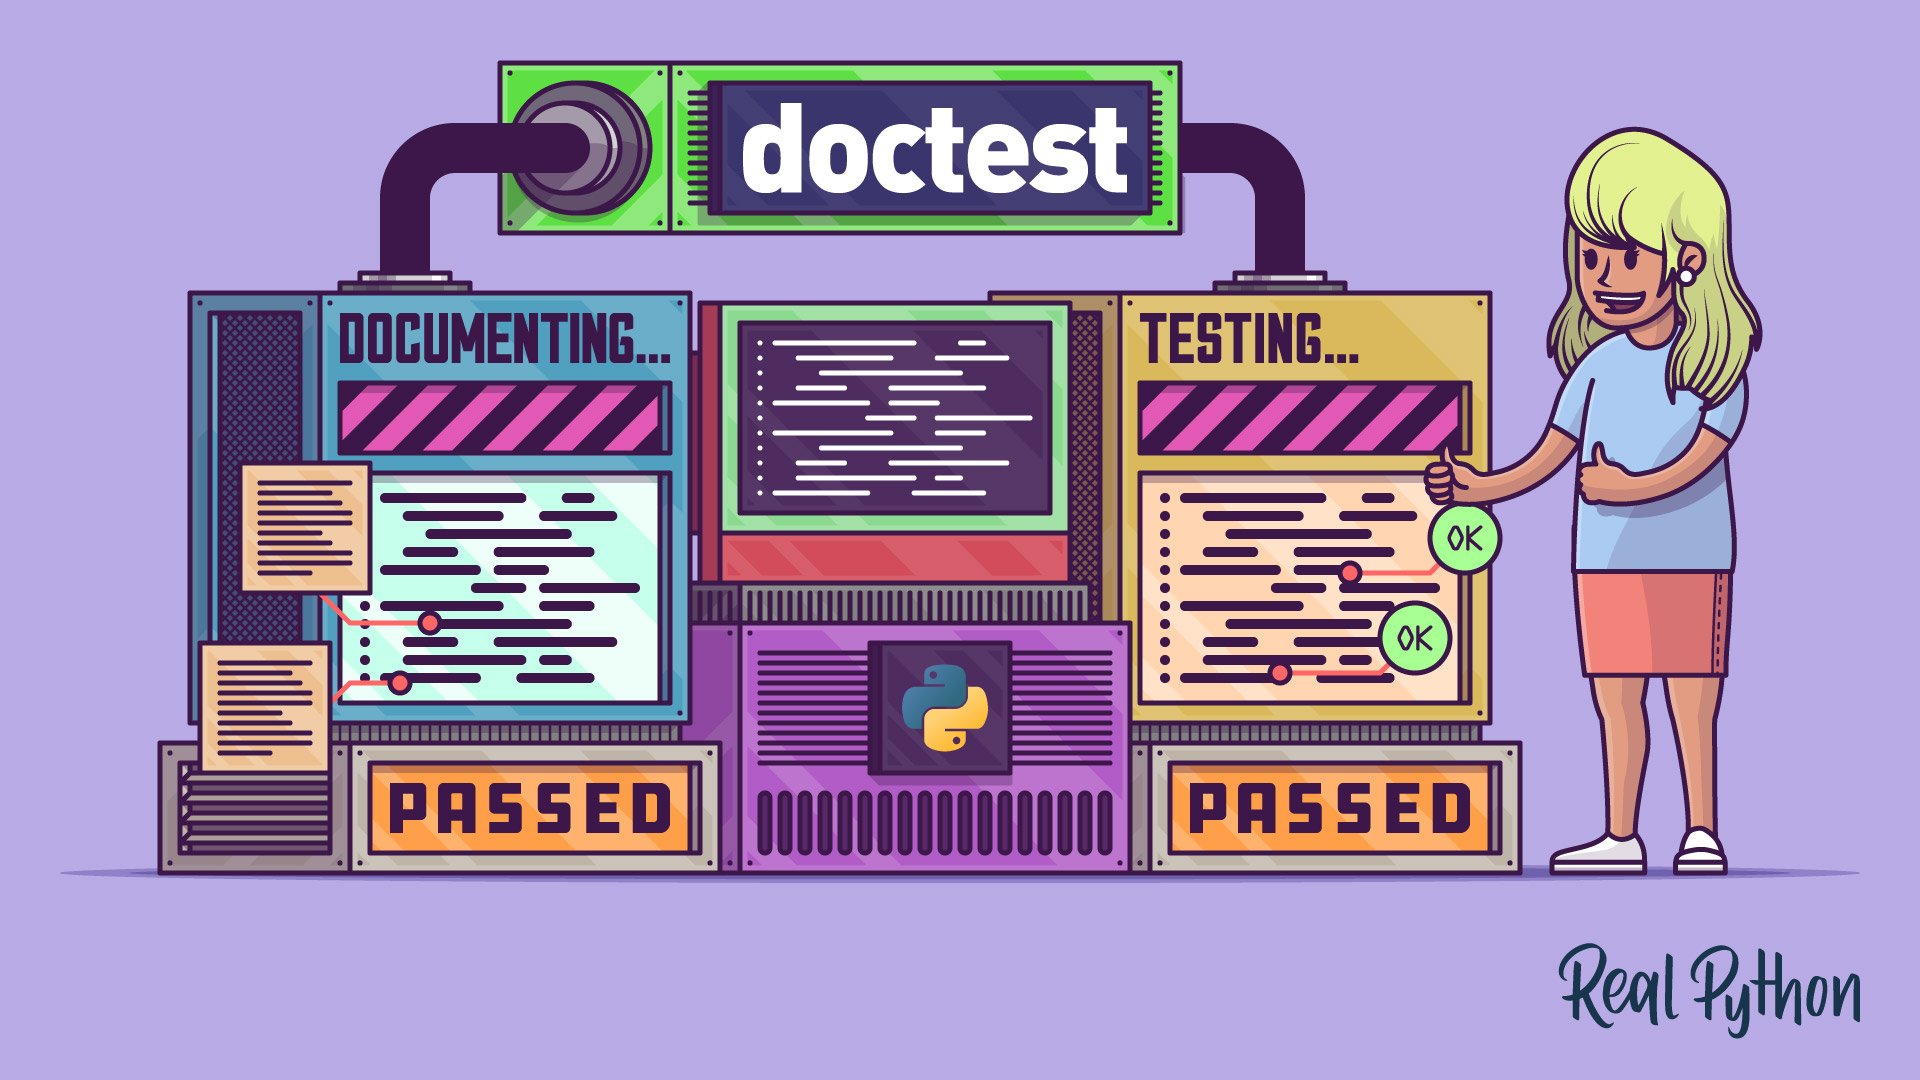 Python's doctest: Document and Test Your Code at Once